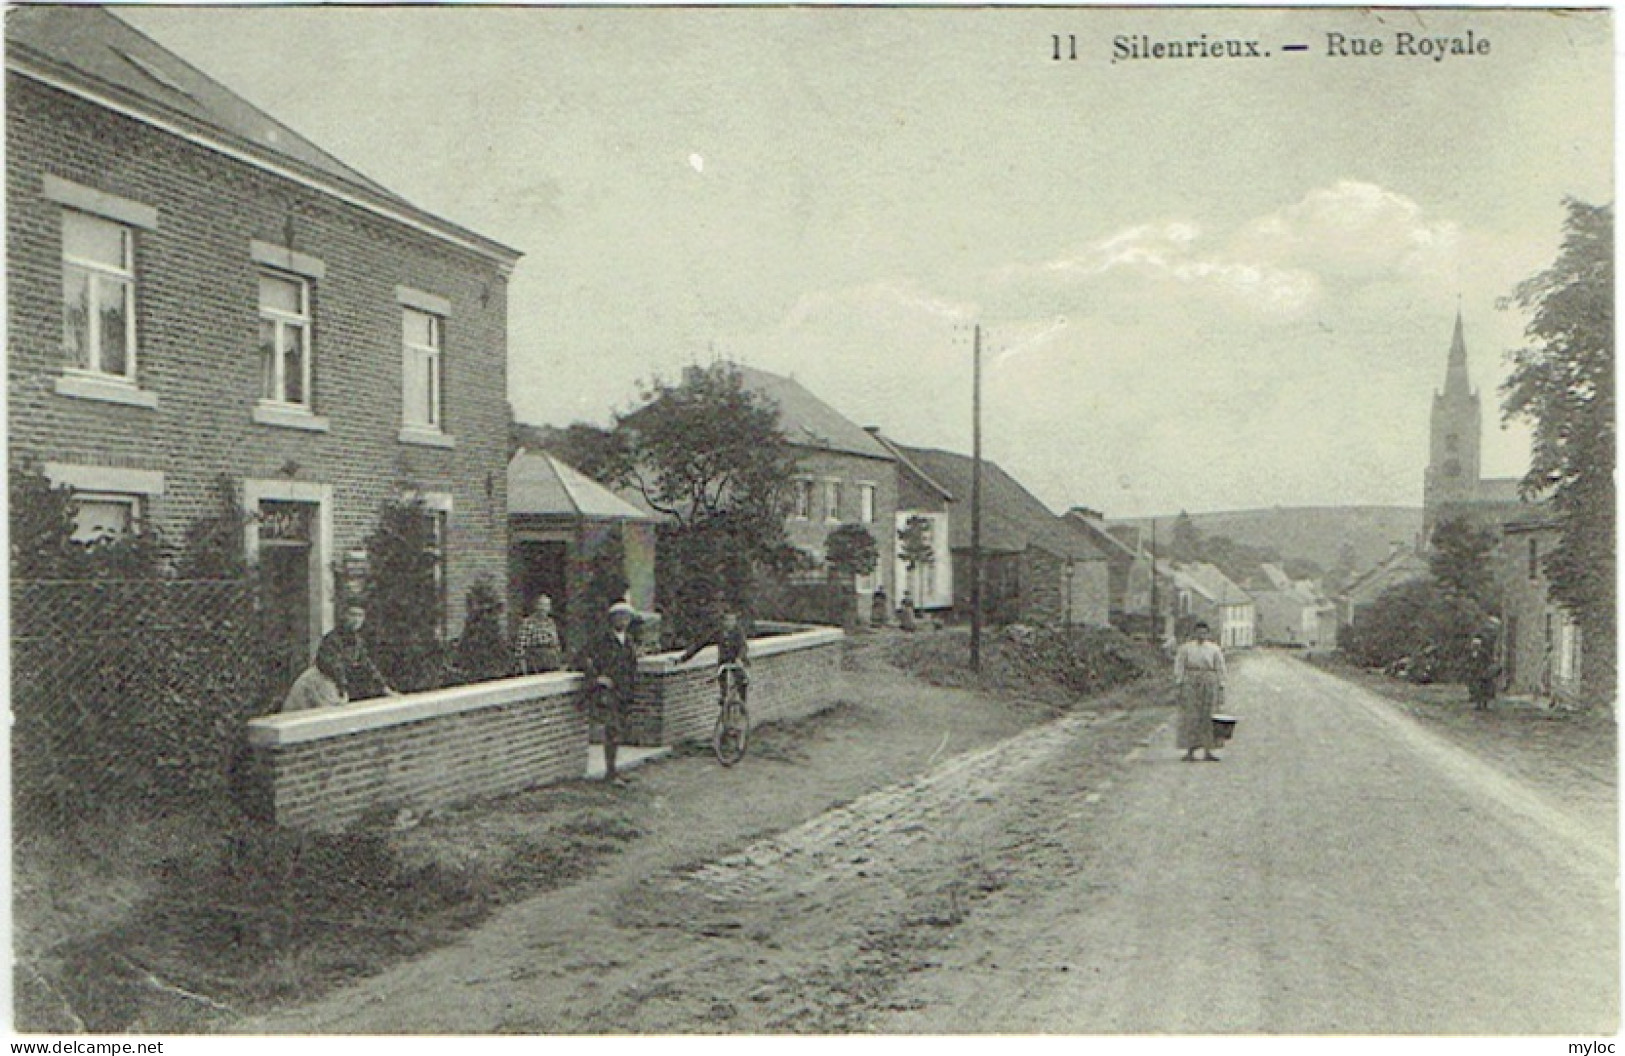 Silenrieux. Rue Royale. - Cerfontaine